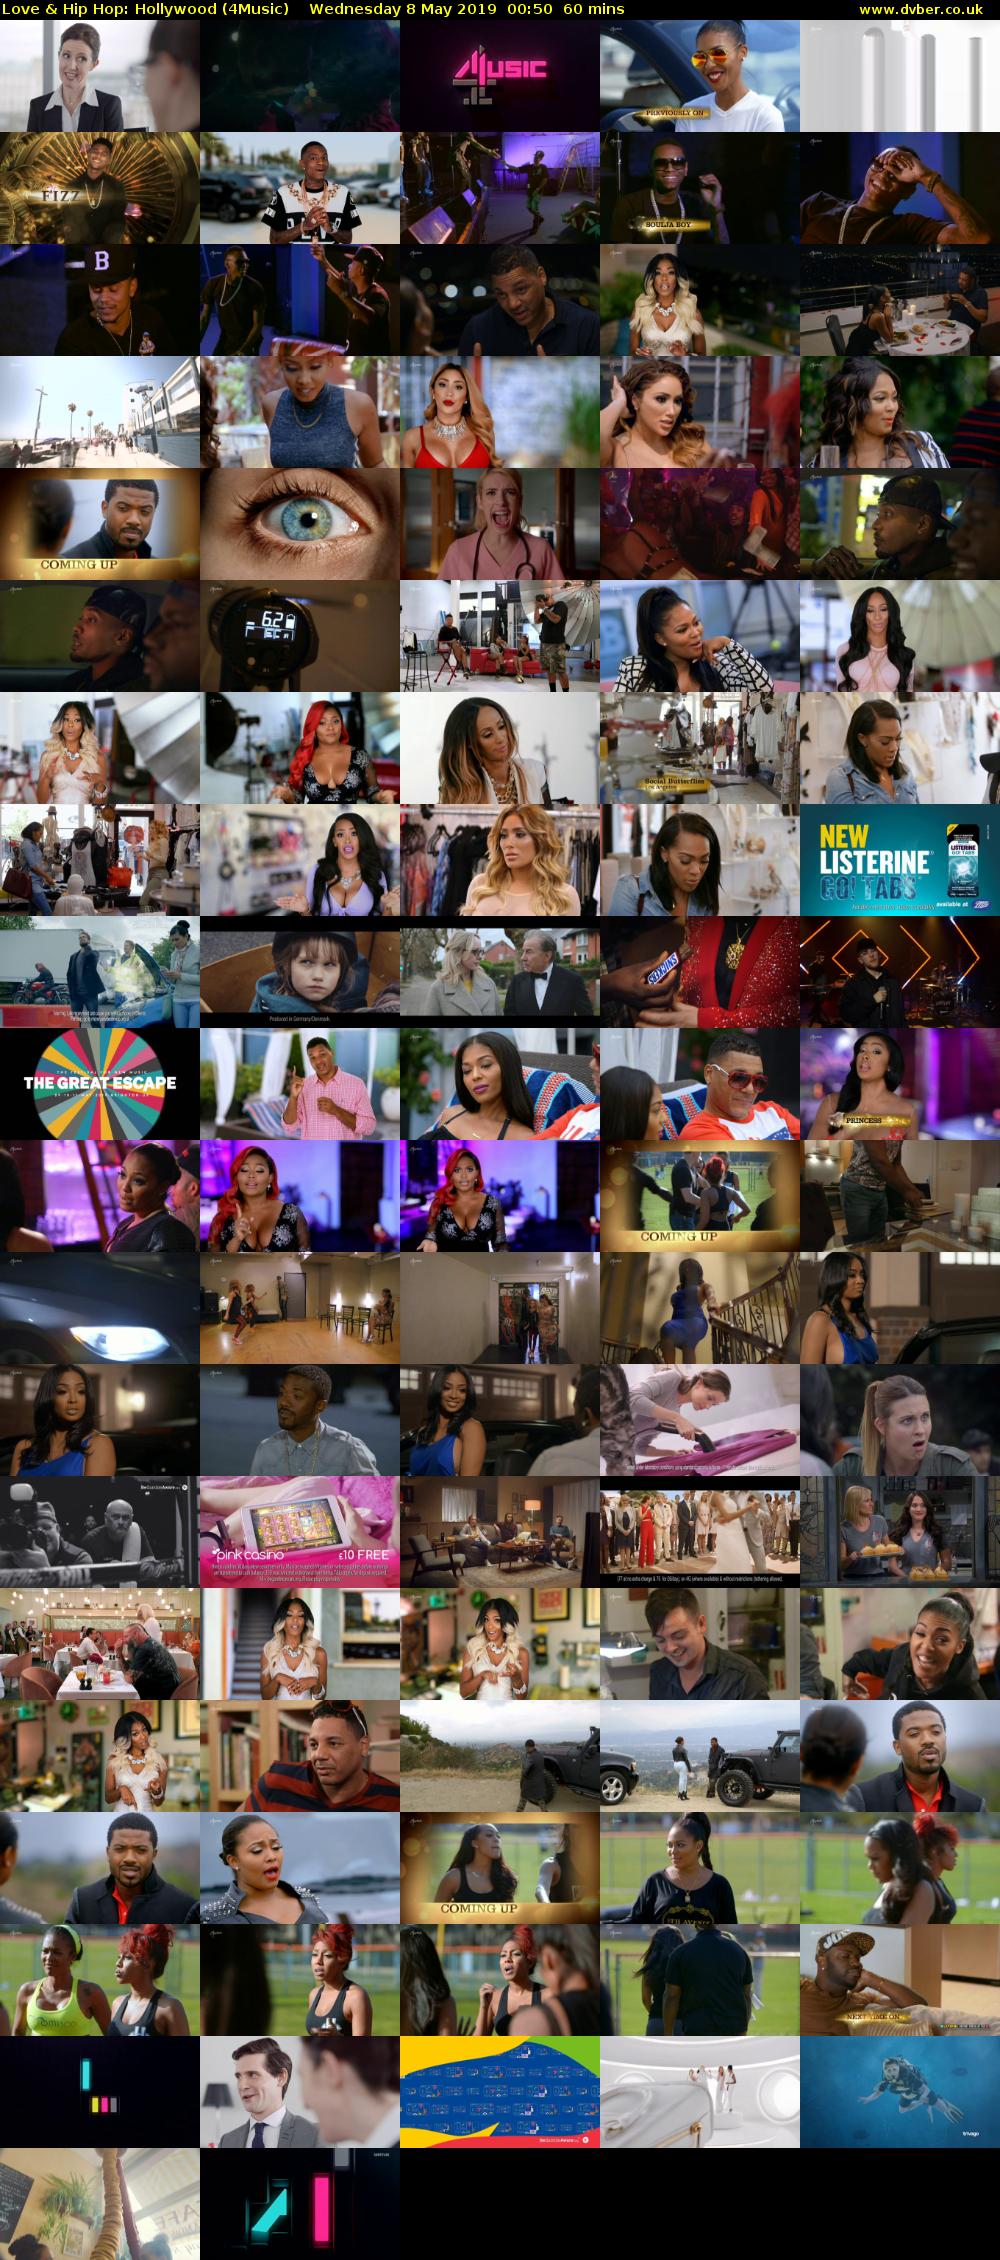 Love & Hip Hop: Hollywood (4Music) Wednesday 8 May 2019 00:50 - 01:50